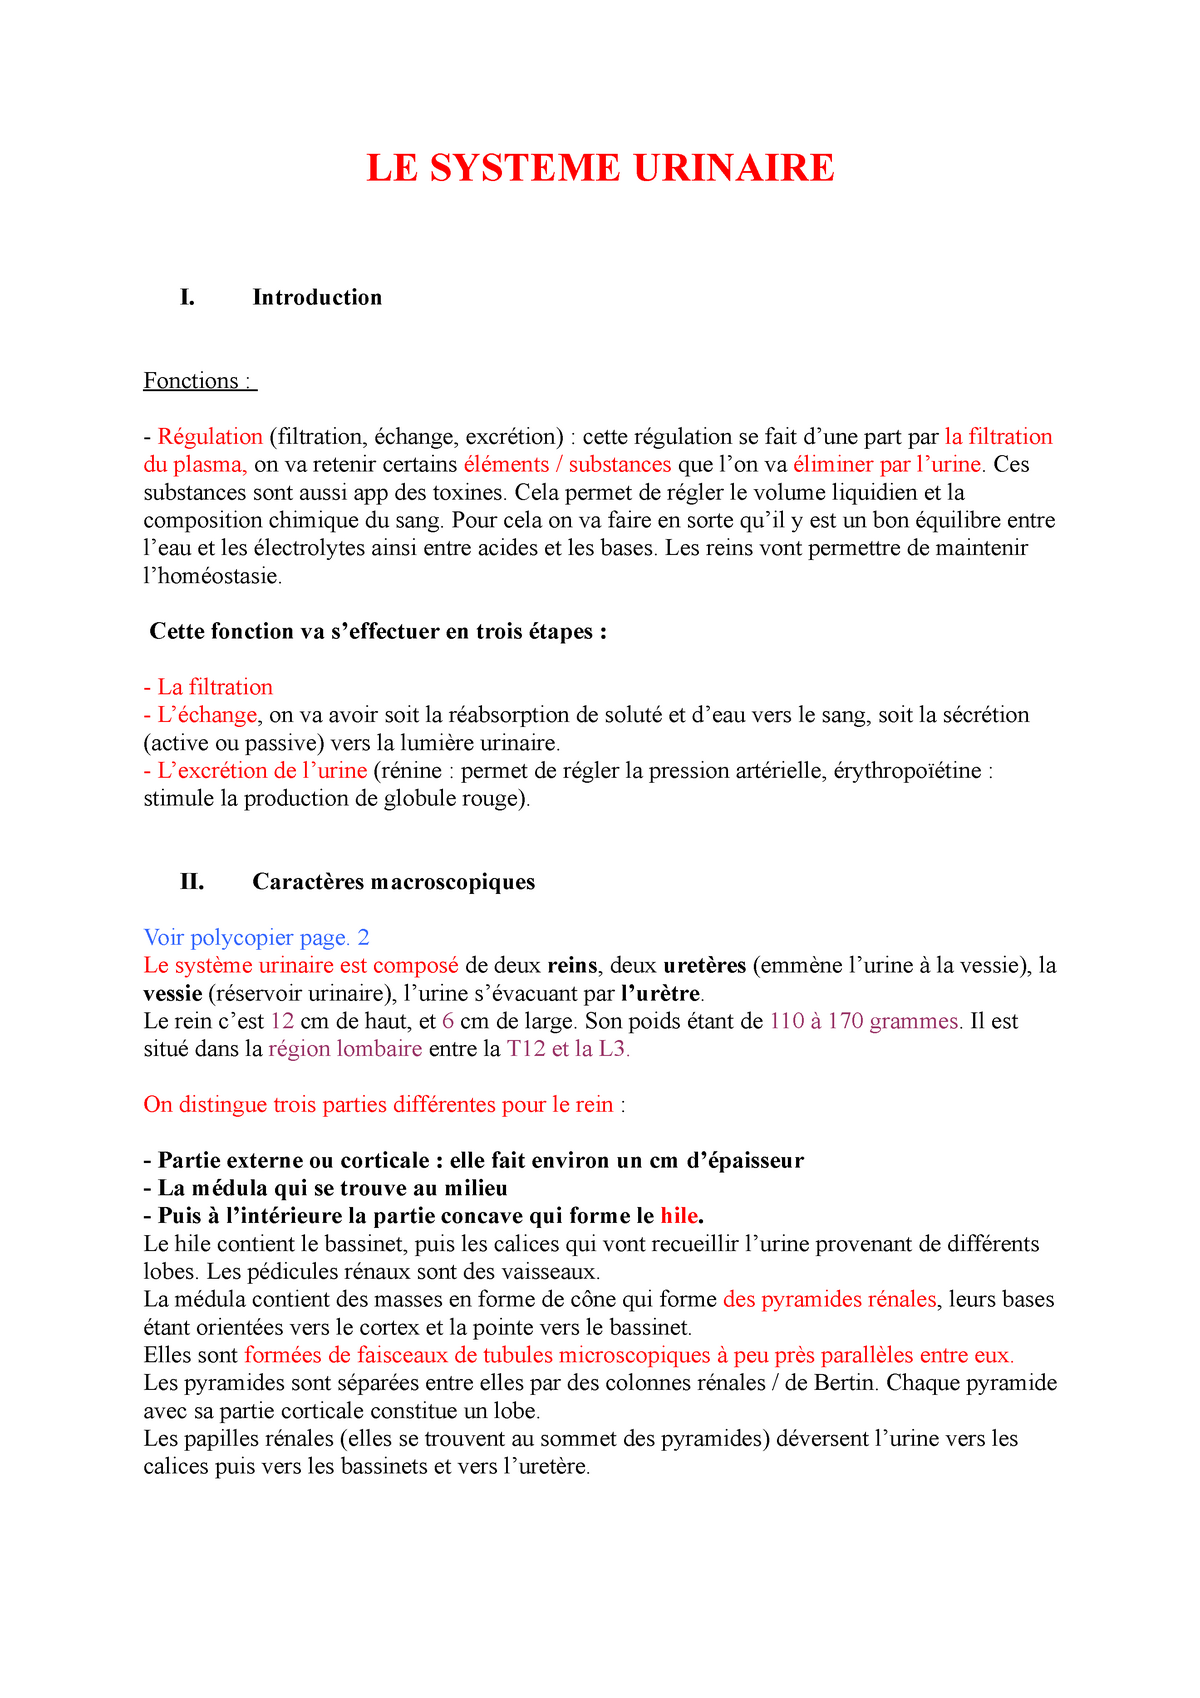 chap3 syst urinaire cours physio l2 staps le systeme urinaire i introduction fonctions studocu